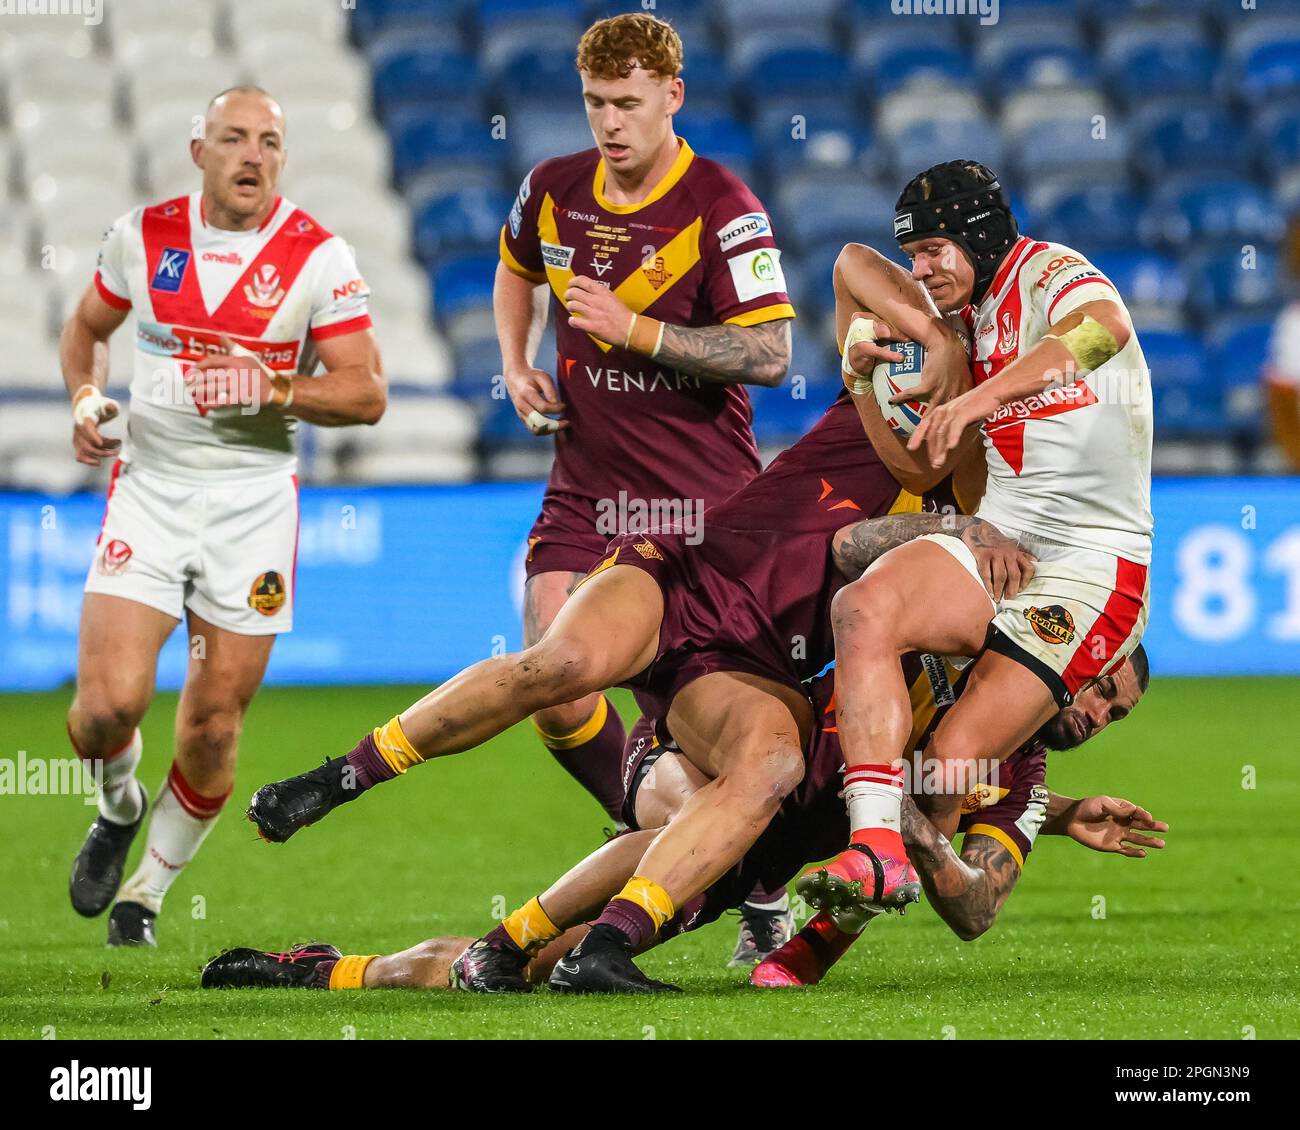 Jonny Lomax #6 of St Helens is tackled by Nathan Peats #9 and Owen Trout #17 of Huddersfield Giants during the Betfred Super League Round 6 match Huddersfield Giants vs St Helens at John Smith's Stadium, Huddersfield, United Kingdom, 23rd March 2023  (Photo by Craig Thomas/News Images) Stock Photo